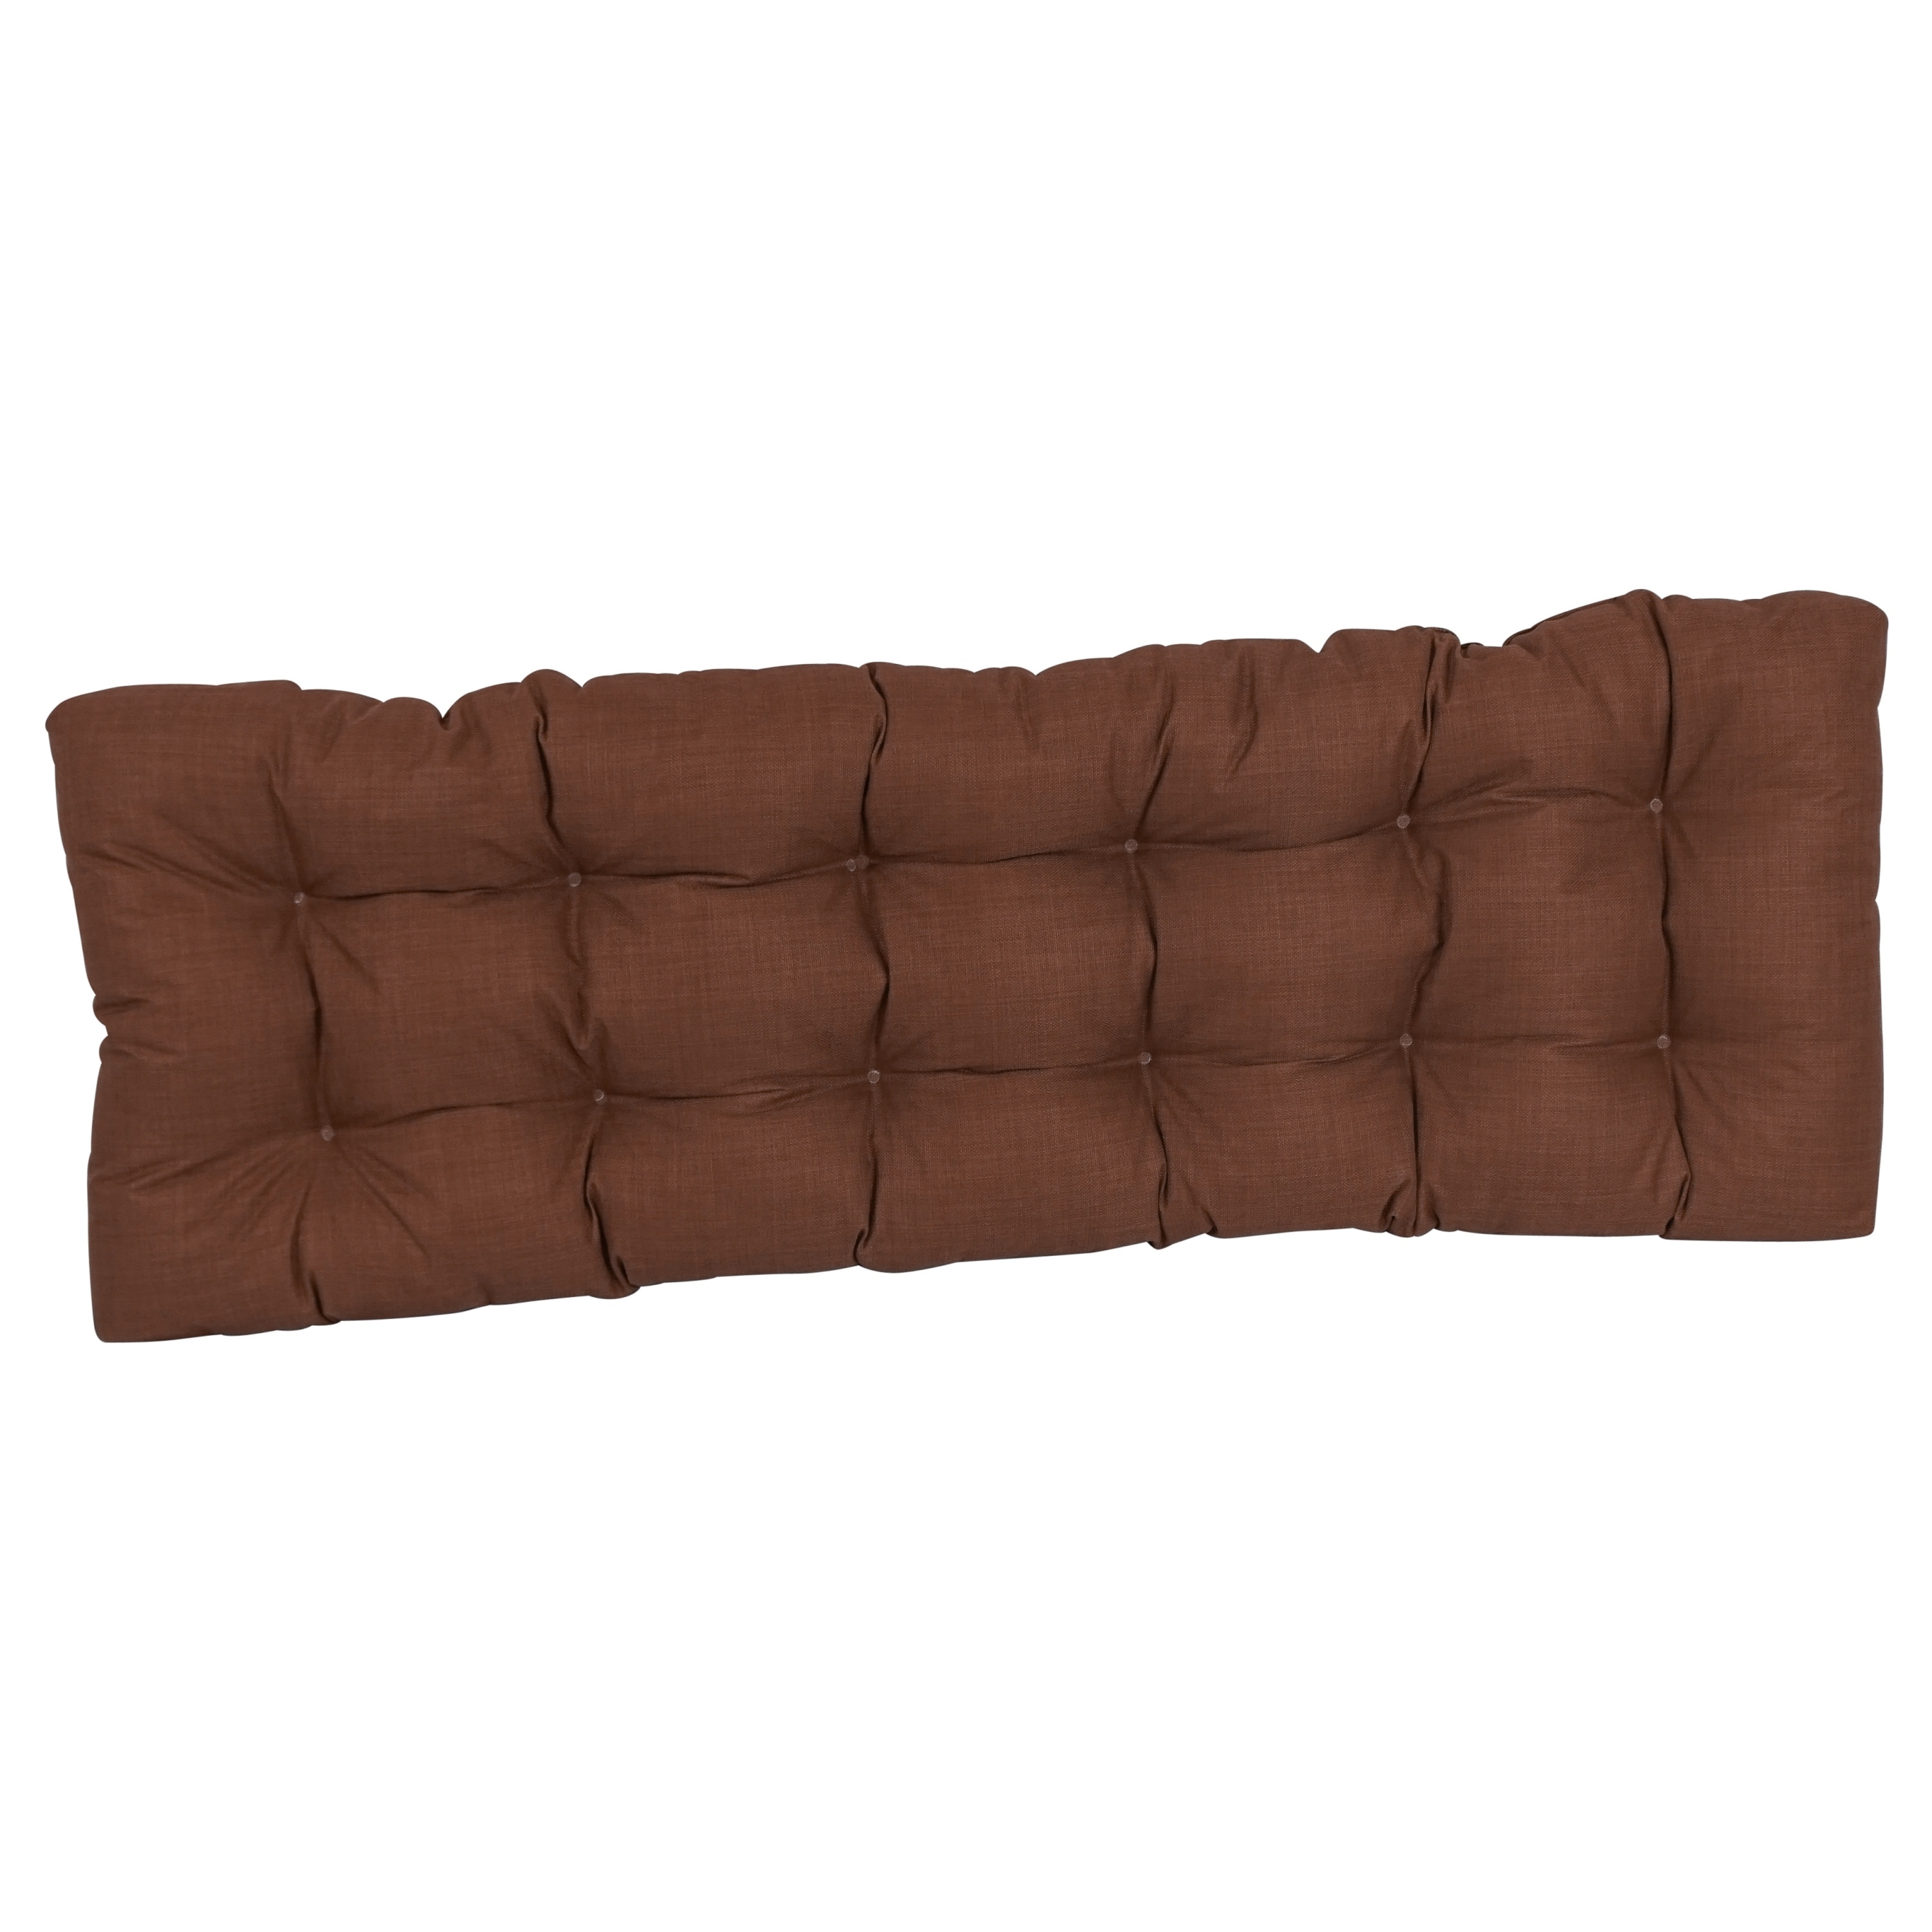 Tufted Indoor/Outdoor Bench Cushion (Multiple widths from 46 to 60 inch) -  On Sale - Bed Bath & Beyond - 30970422